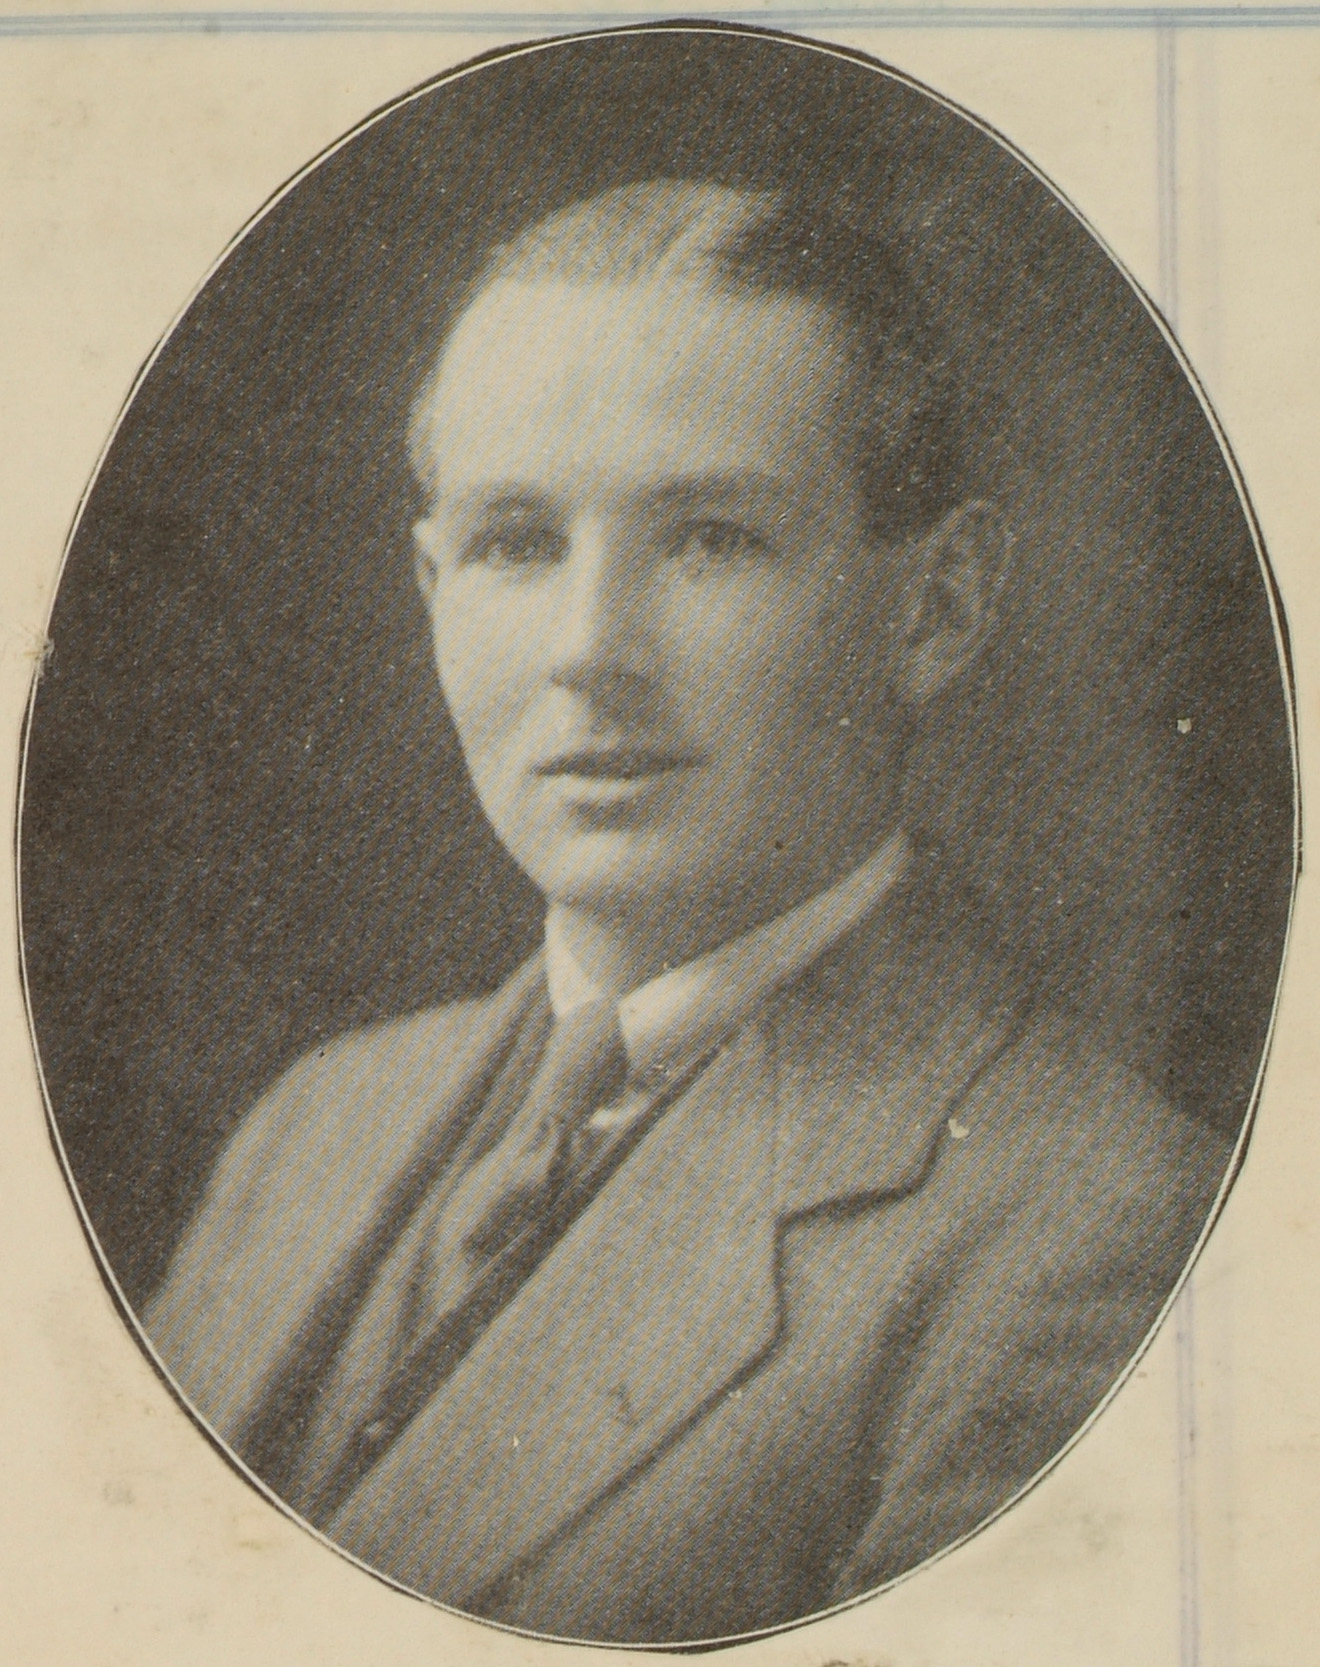 William newly engaged in 1920